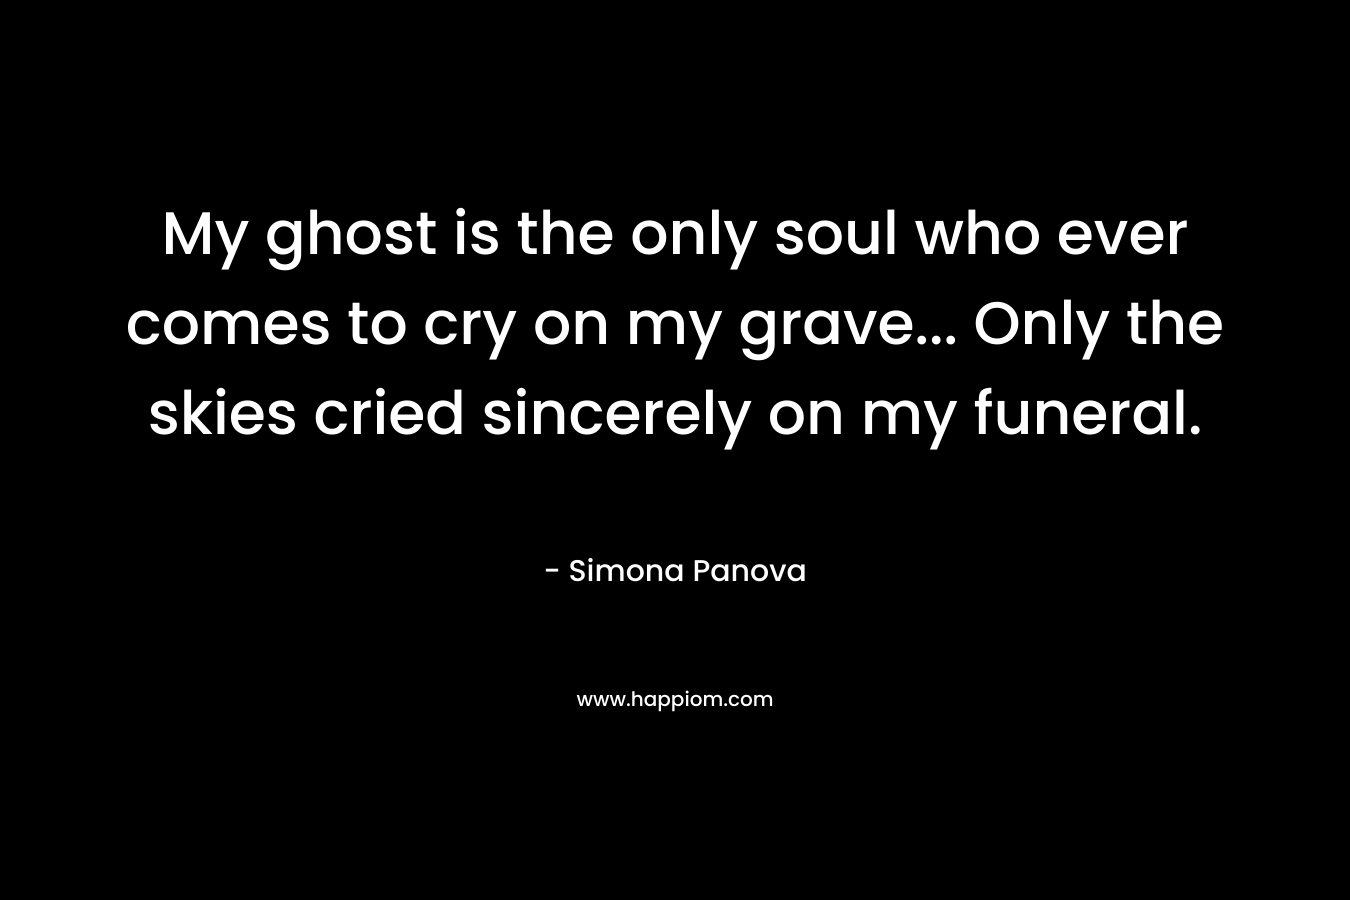 My ghost is the only soul who ever comes to cry on my grave... Only the skies cried sincerely on my funeral.